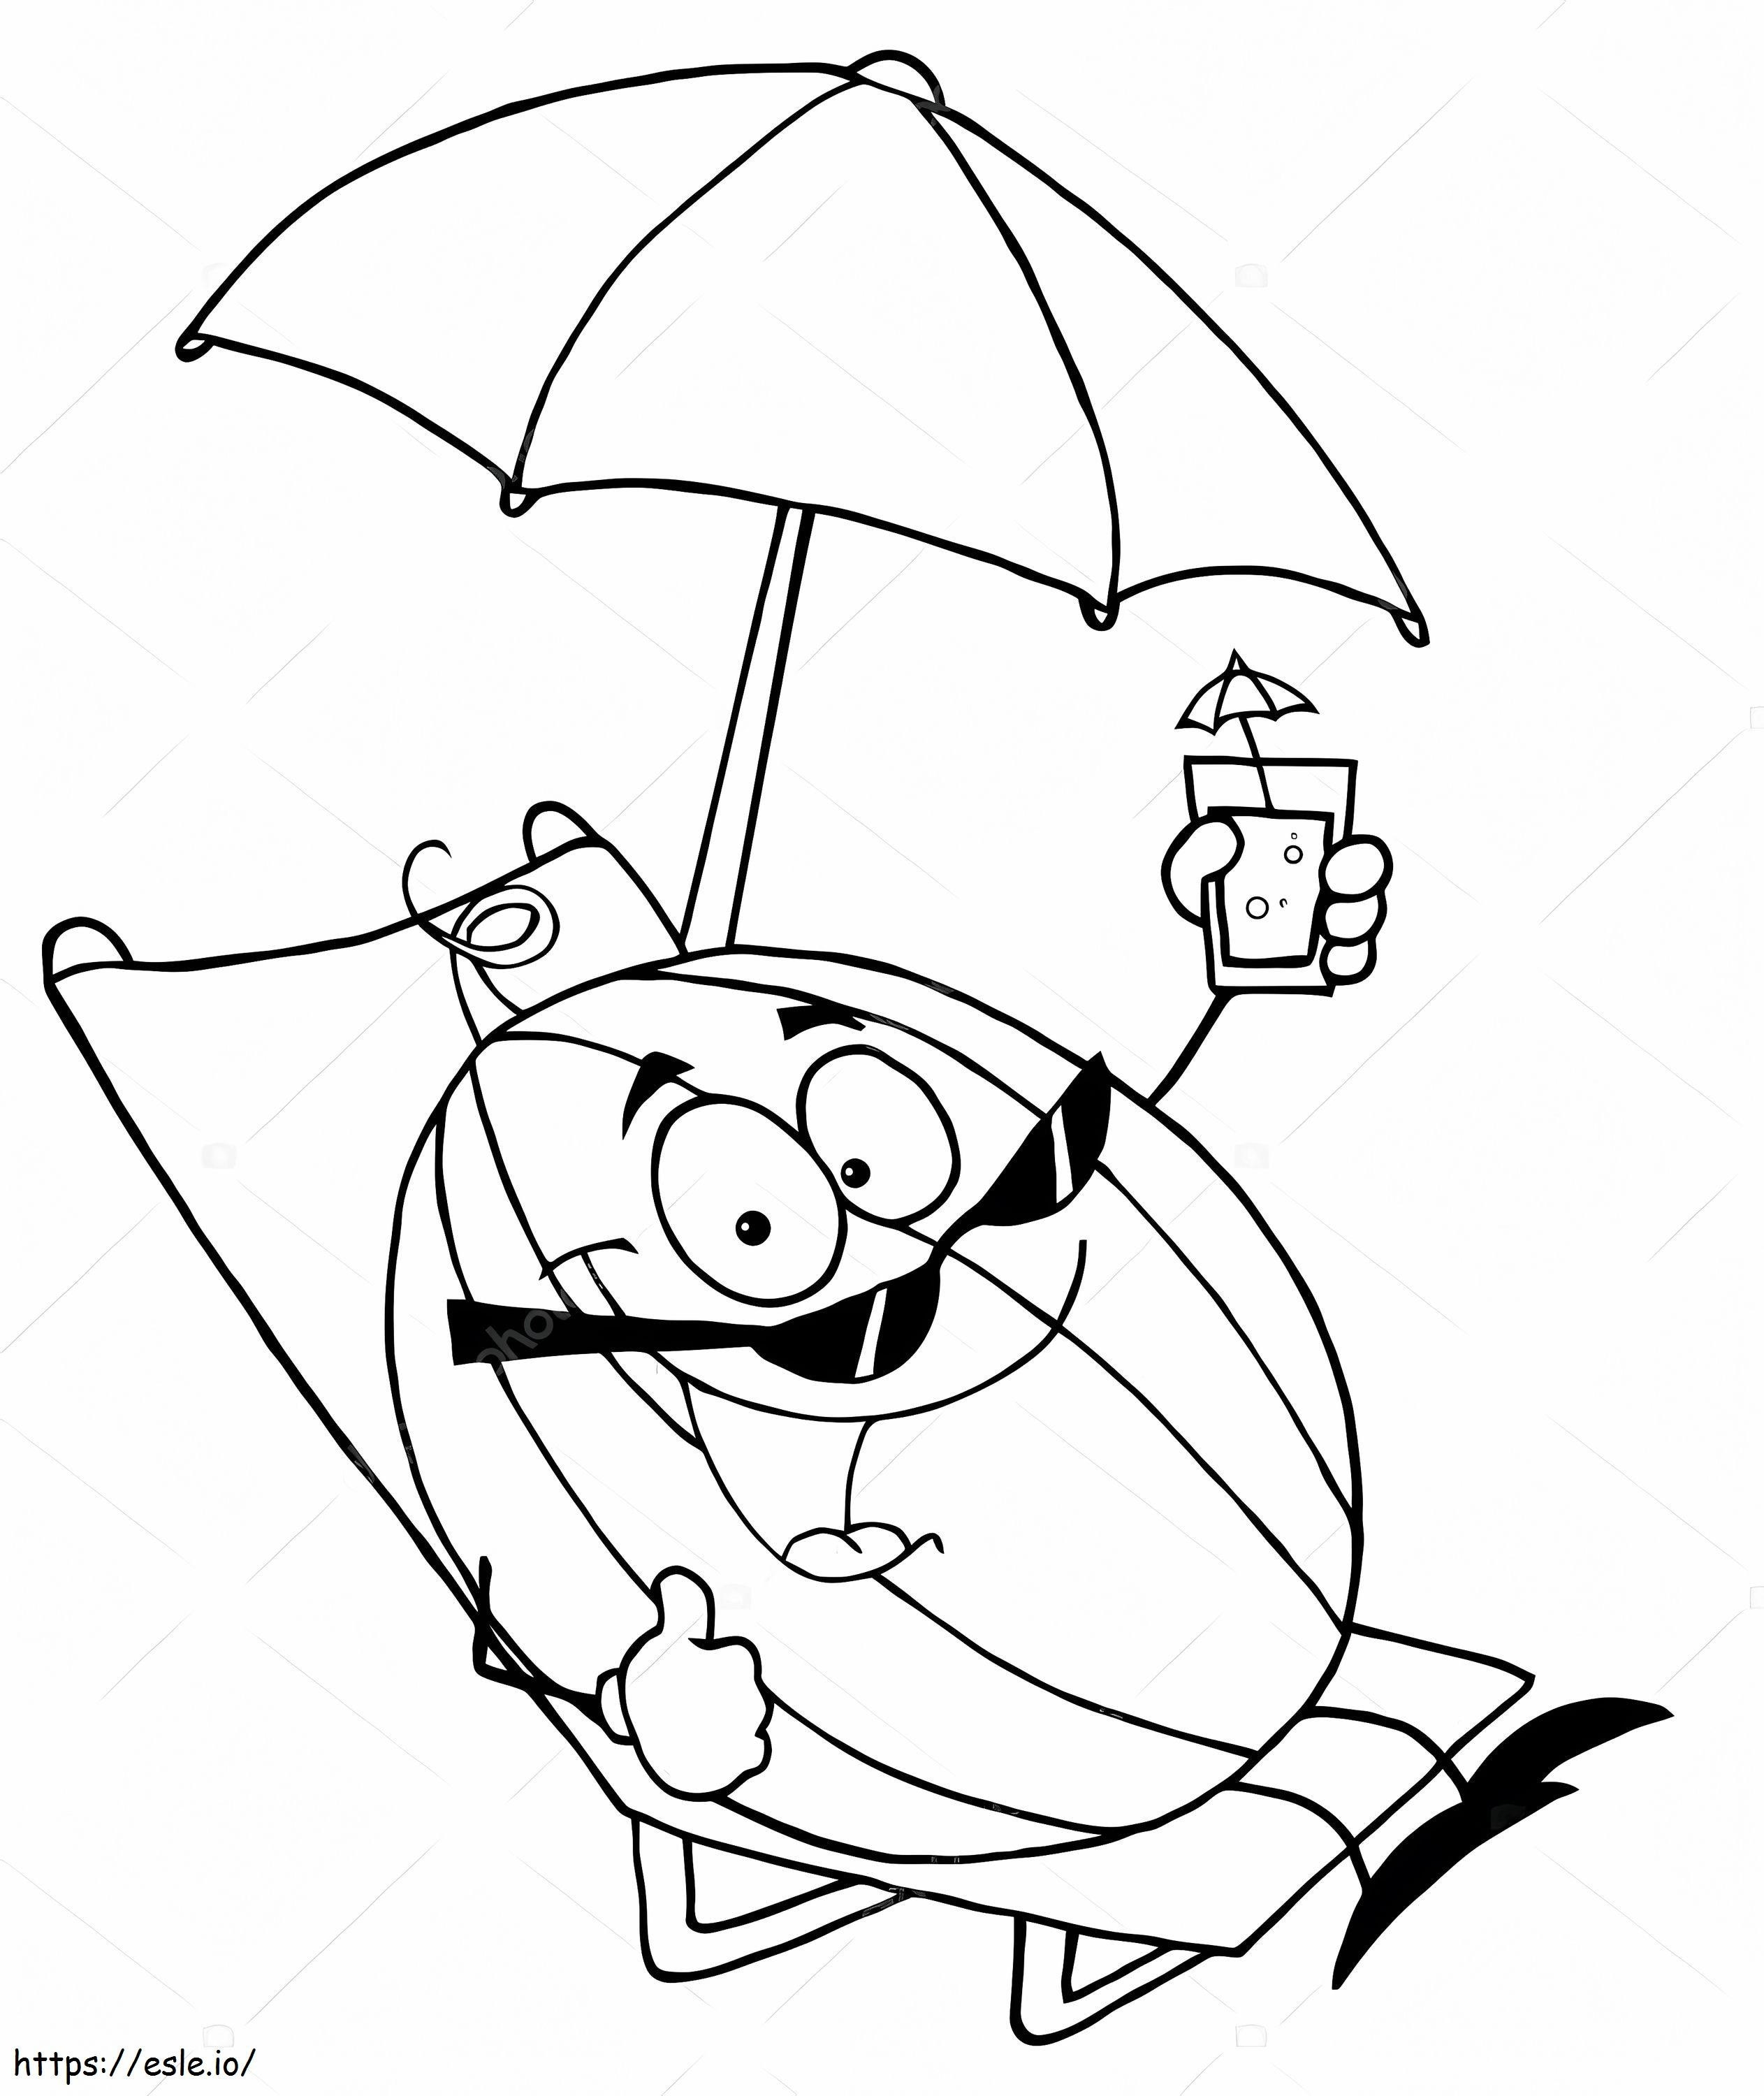 Depositphotos 61064939 Stock Illustration Watermelon Cartoon Character coloring page